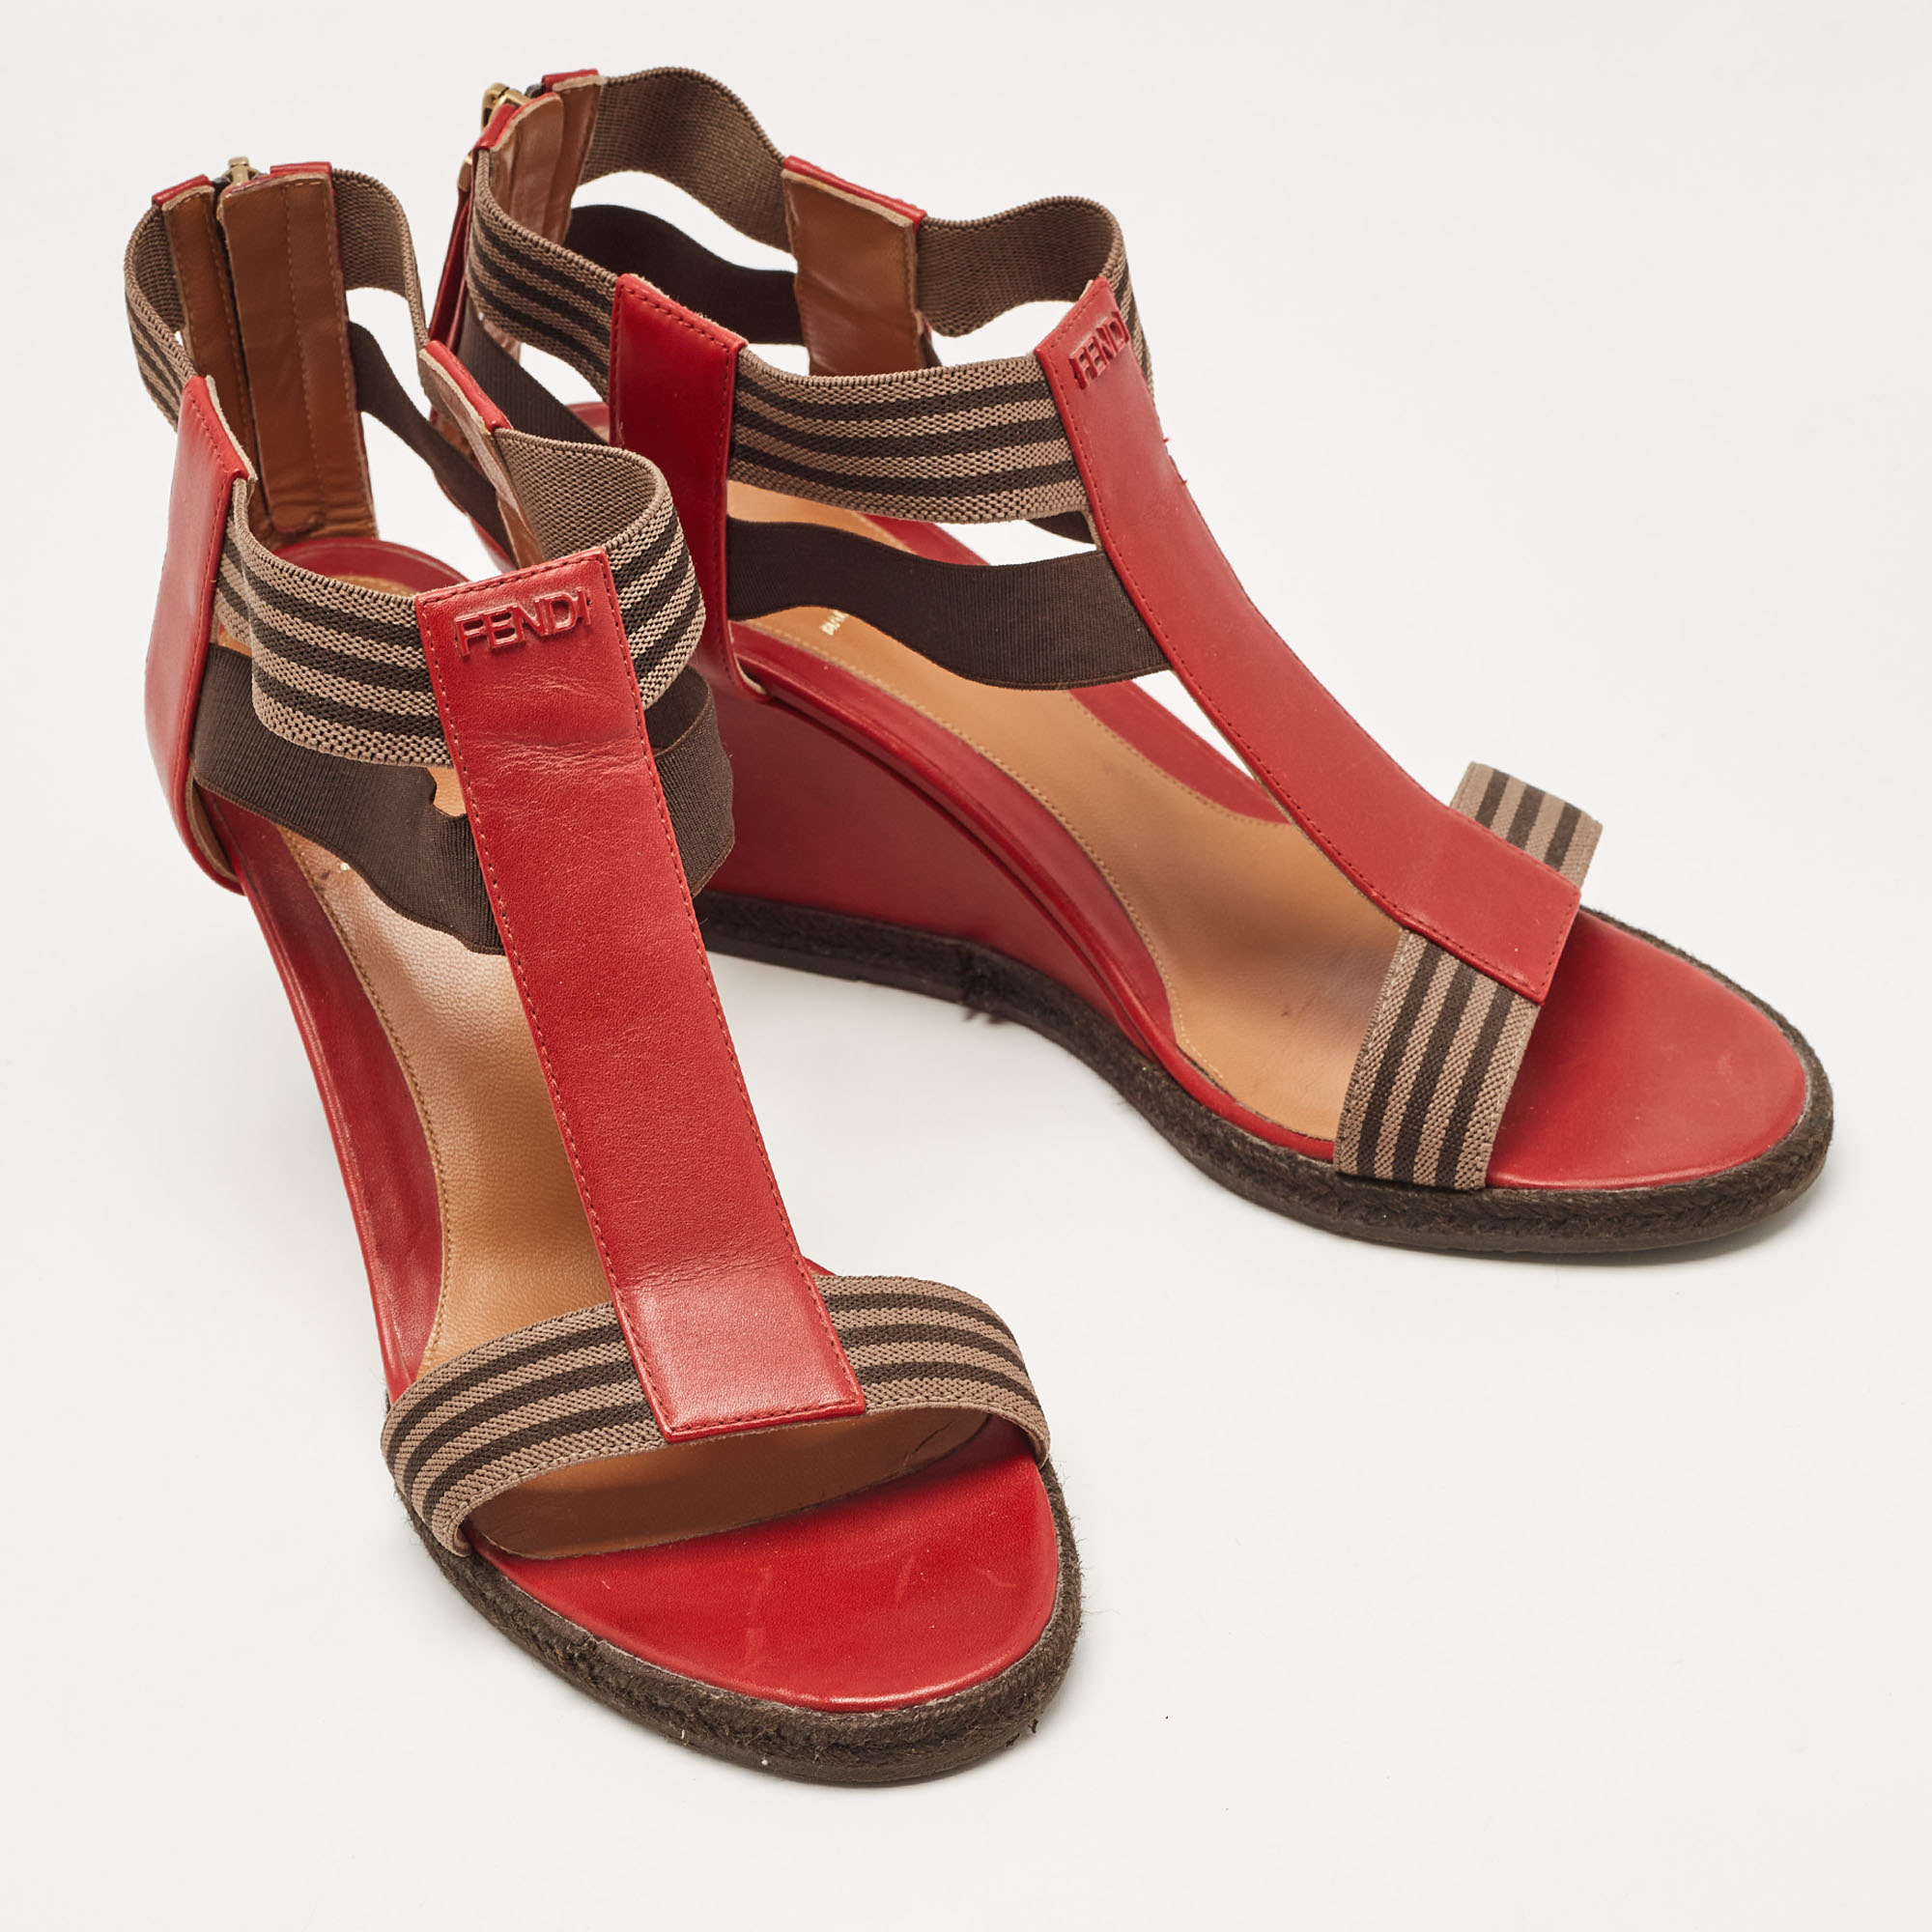 Fendi Red/Brown Leather And Elastic T-Strap Espadrille Wedge Sandals Size 39